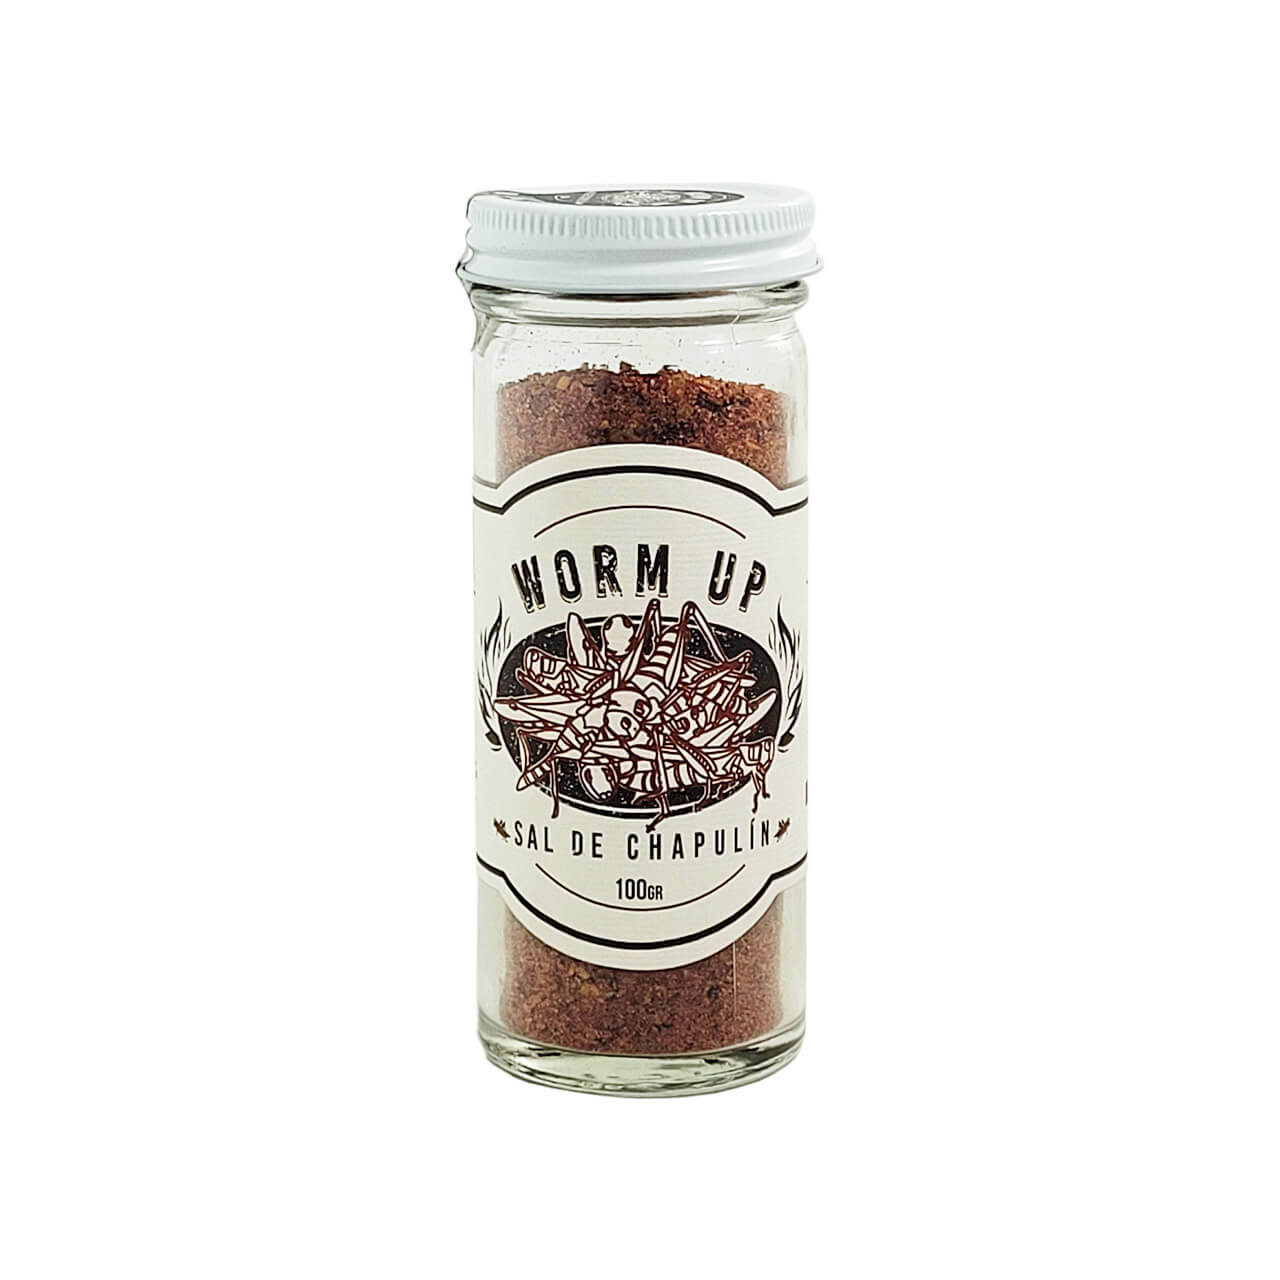 Product image for “Worm Up Chapulin Salt”